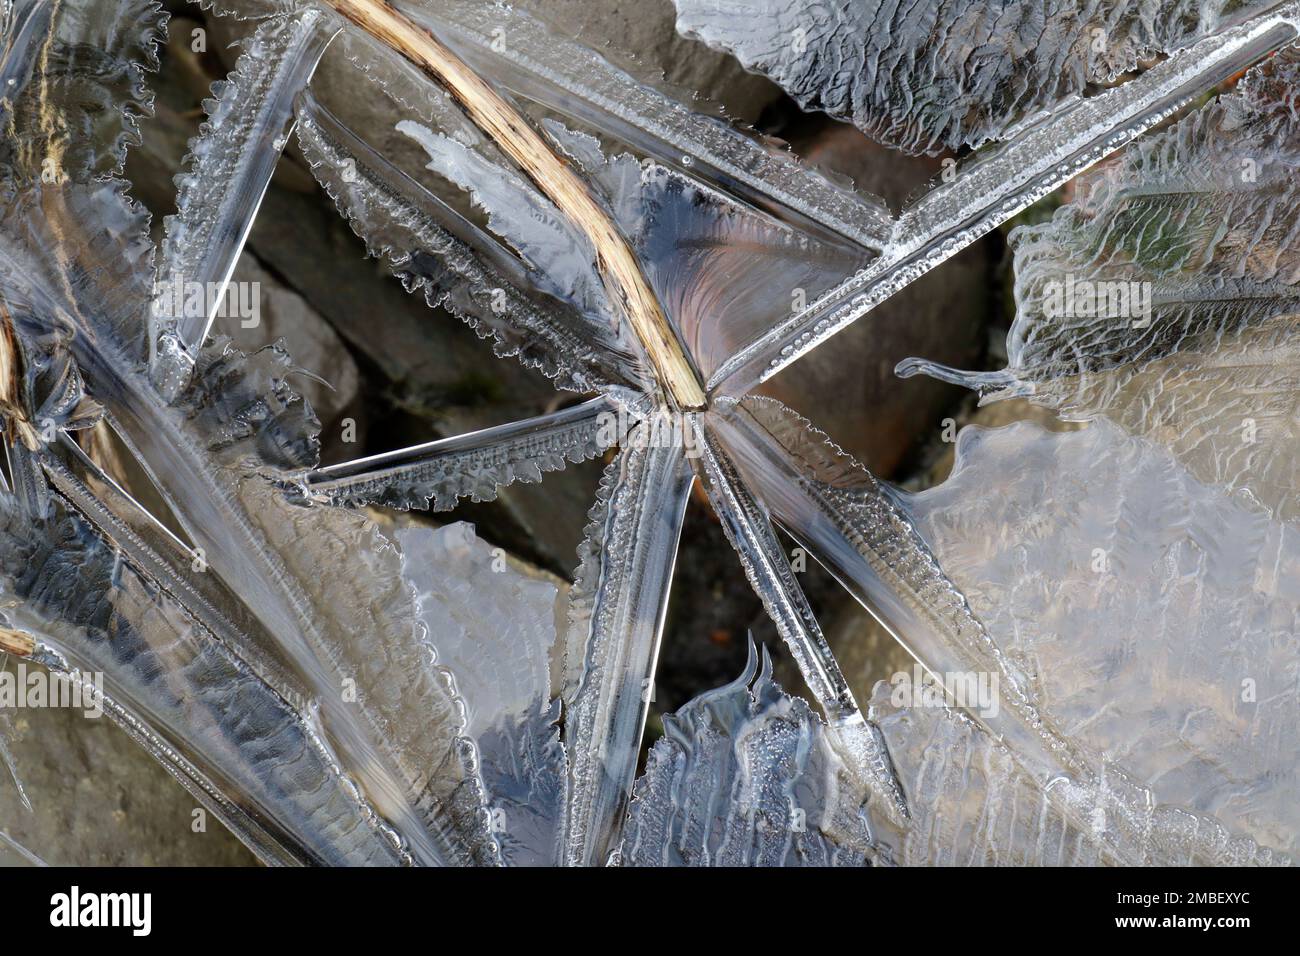 Close-up of semi-transparent star-like ice formation, with some plant matter and pebbles beneath. Stock Photo